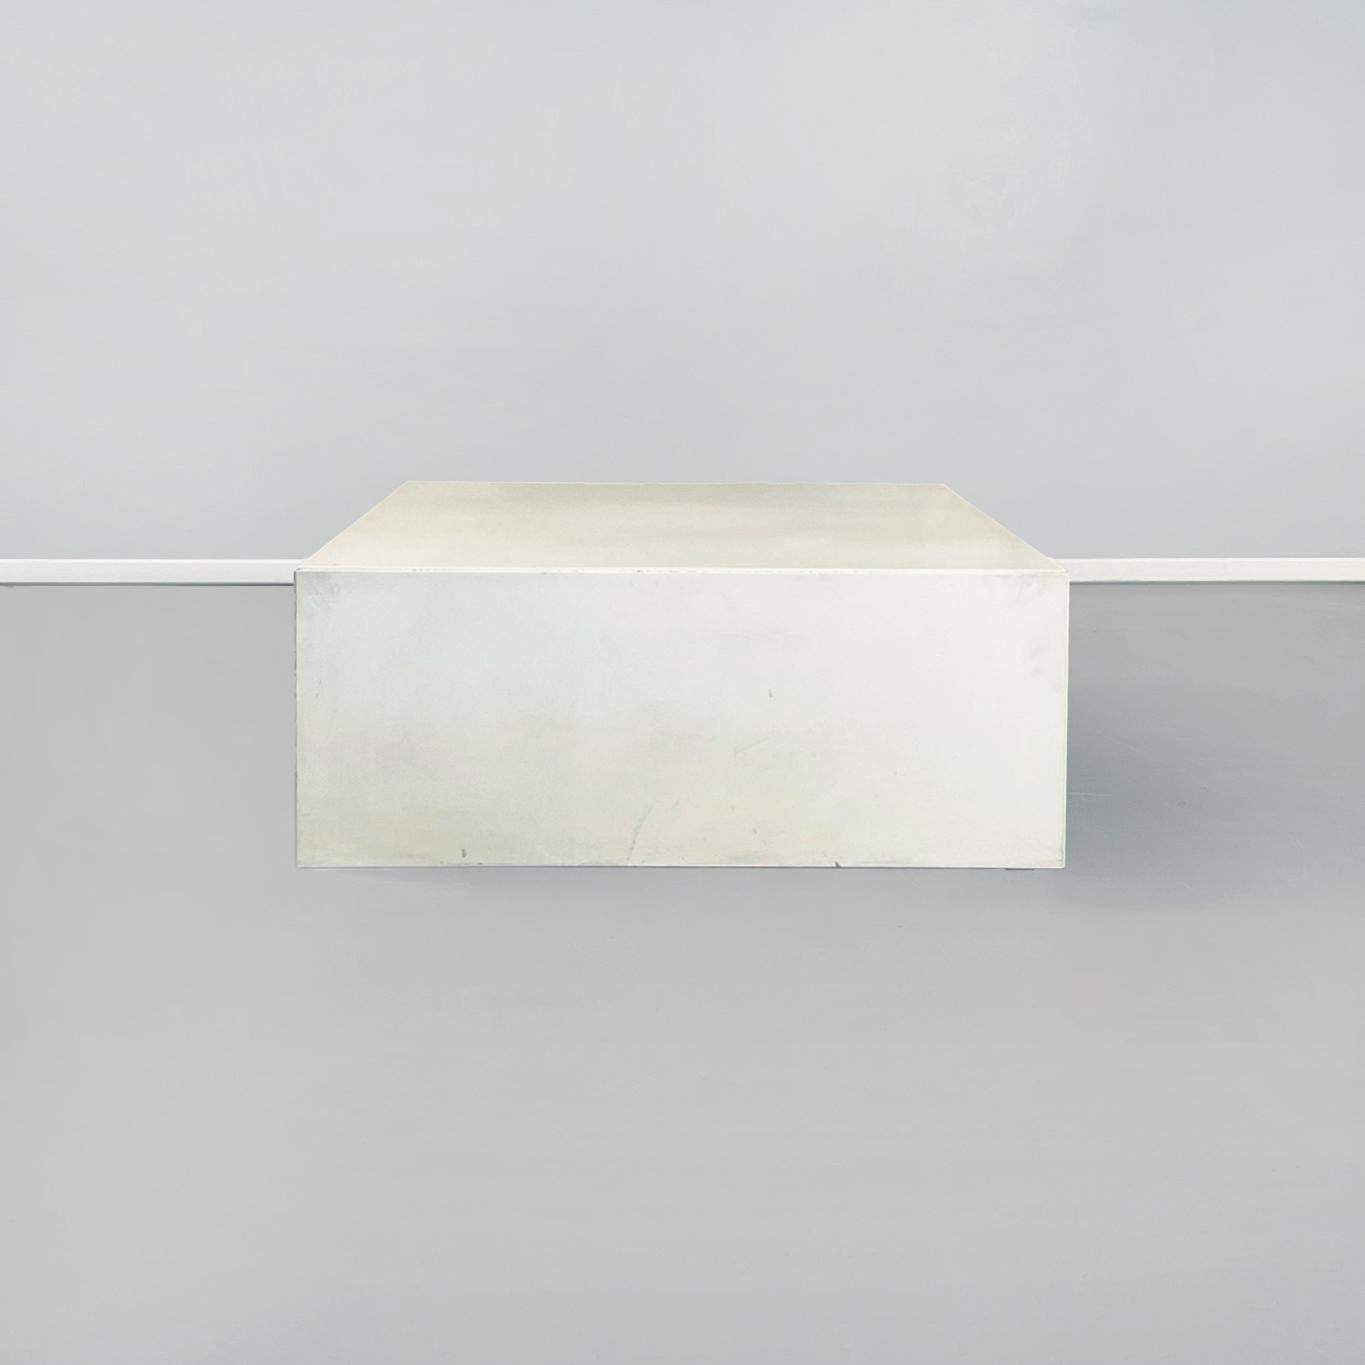 Italian mid-century white wooden square coffee table, 1970s
Square coffee table in white painted wood.
1970s.
Good conditions.
Measurements in cm 100 × 100 x 40.5 H.